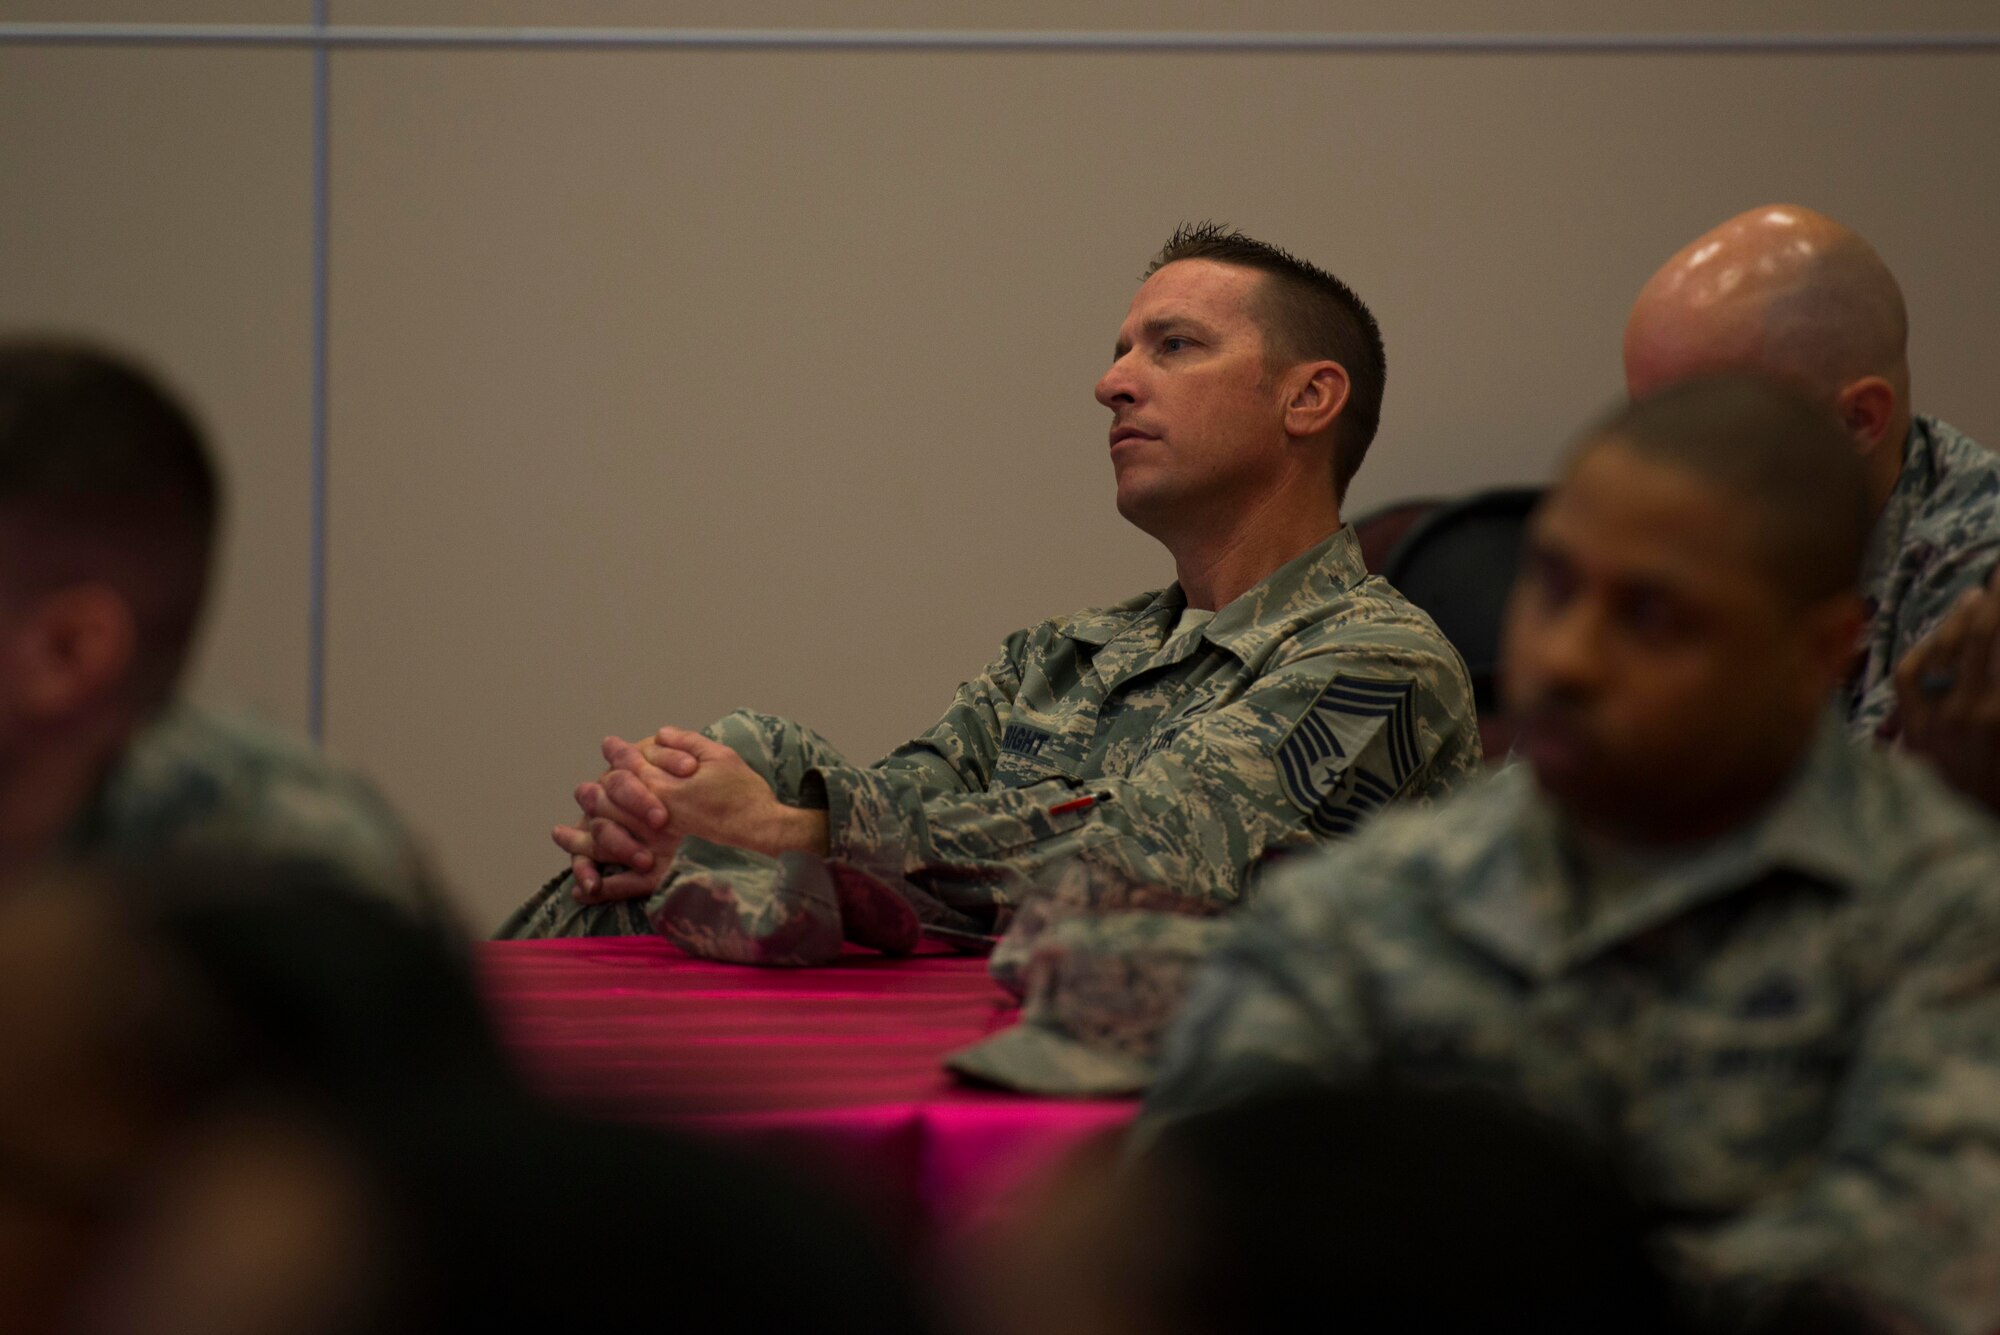 U.S. Air Force Chief Master Sgt. Jerry Wright, 39th Logistics Readiness Squadron superintendent, listens at Incirlik’s International Women’s Day lunch and learn event March 8, 2017, at Incirlik Air Base, Turkey. The event featured four female Air Force commanders who shared their leadership experiences in the Air Force. (U.S. Air Force photo by Airman 1st Class Devin M. Rumbaugh) 